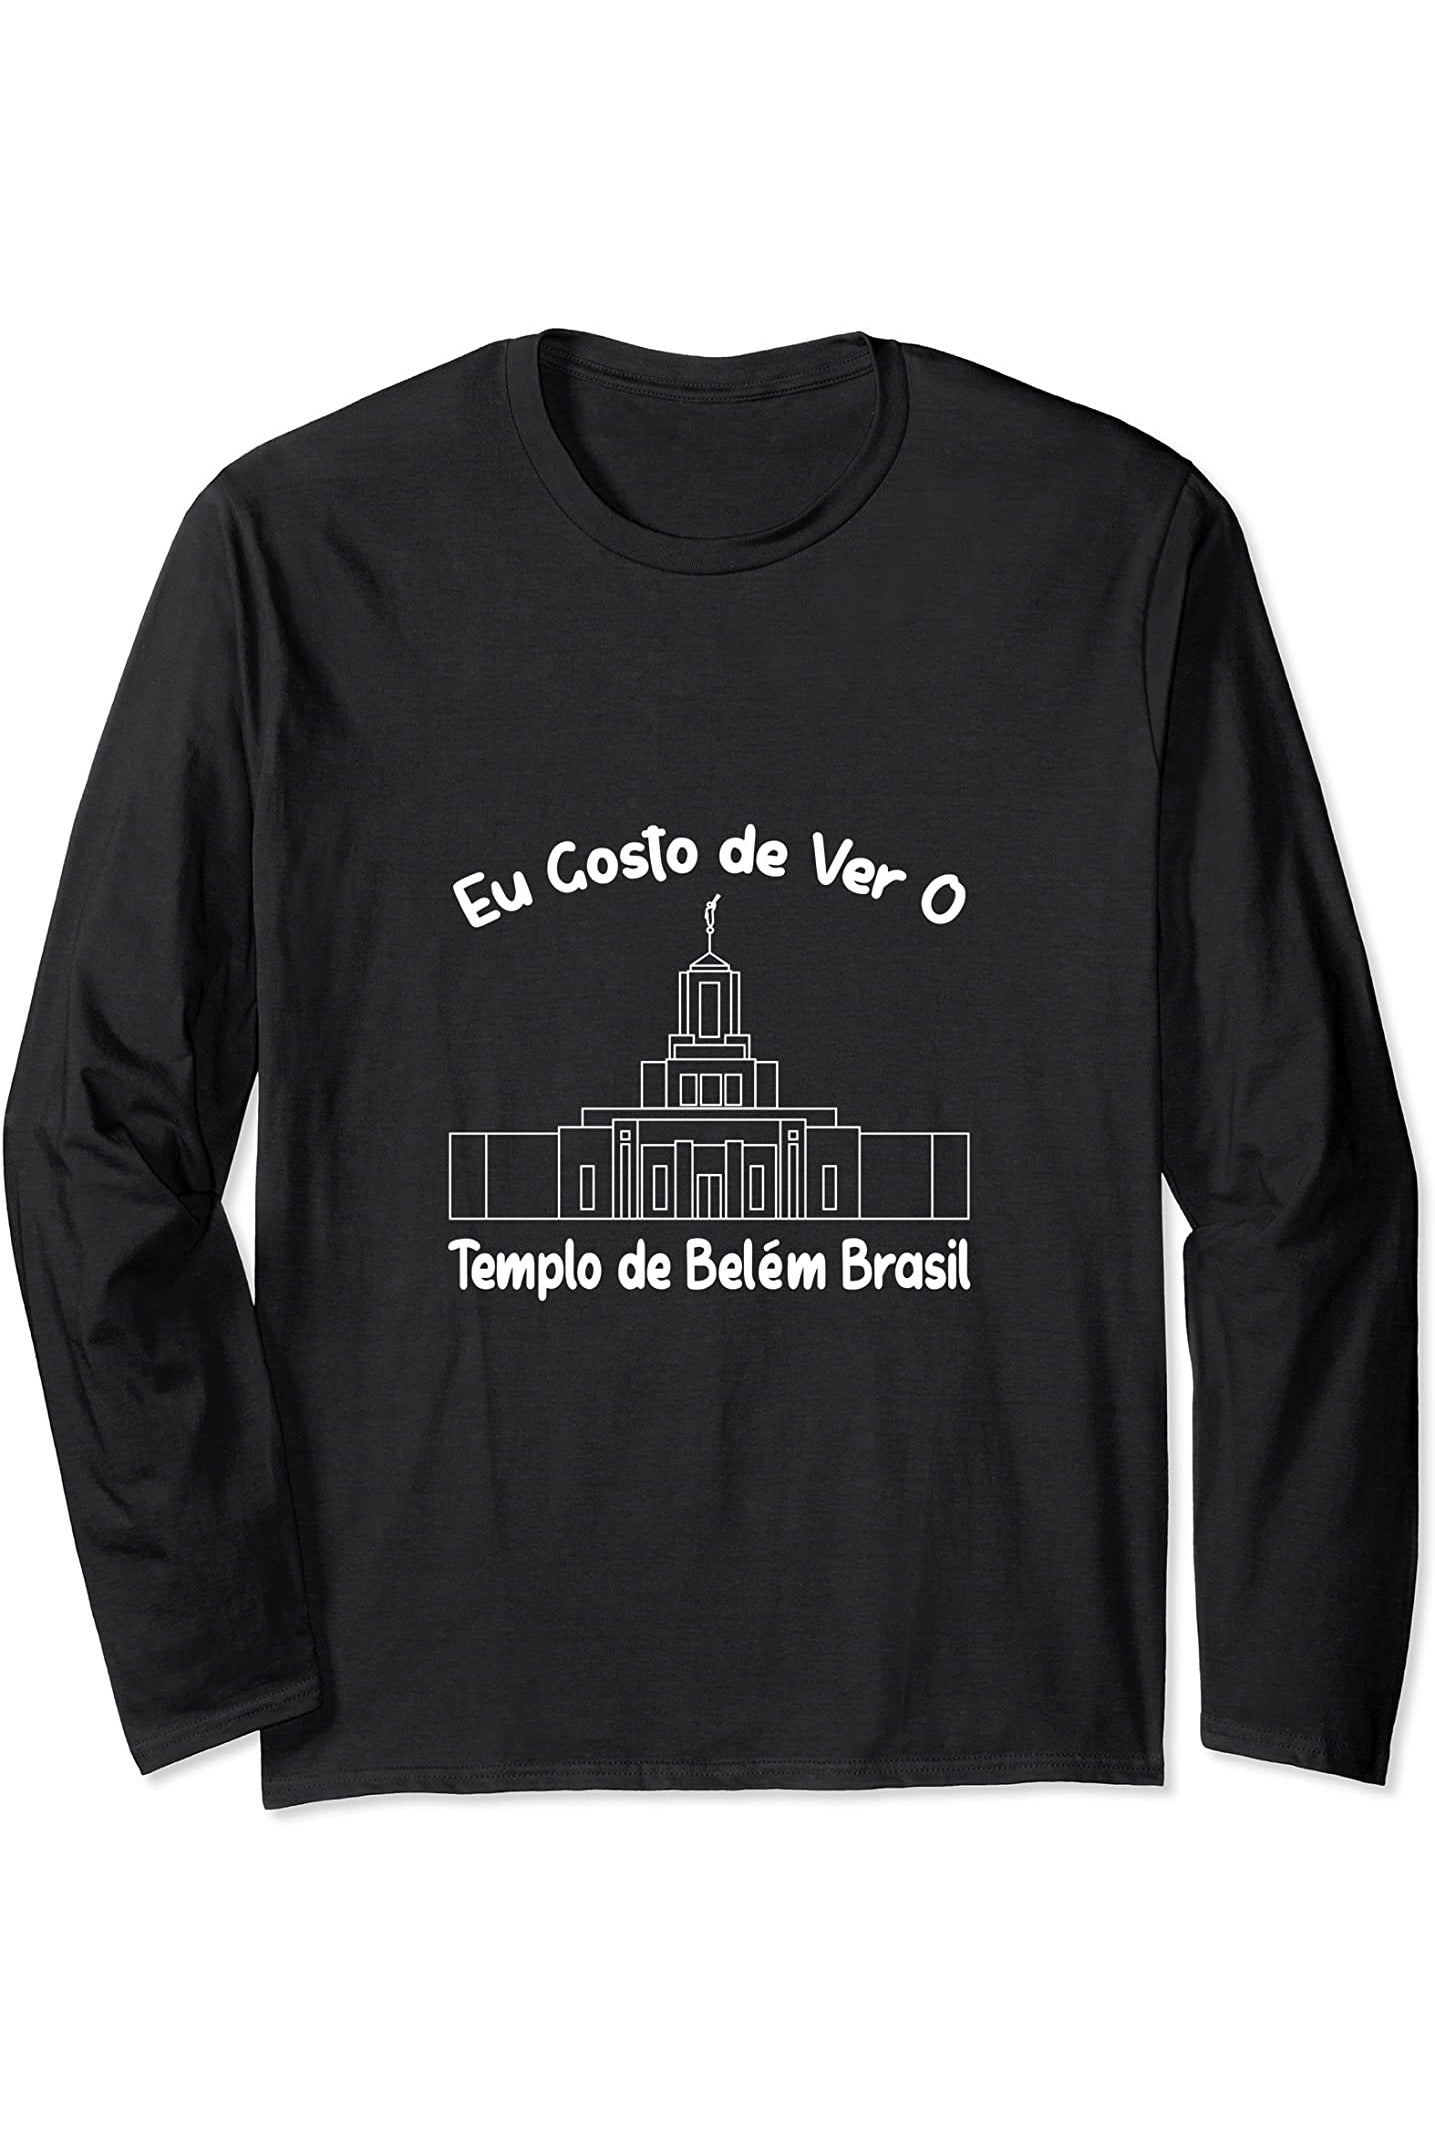 Belem Brazil Temple Long Sleeve T-Shirt - Primary Style (Portuguese) US